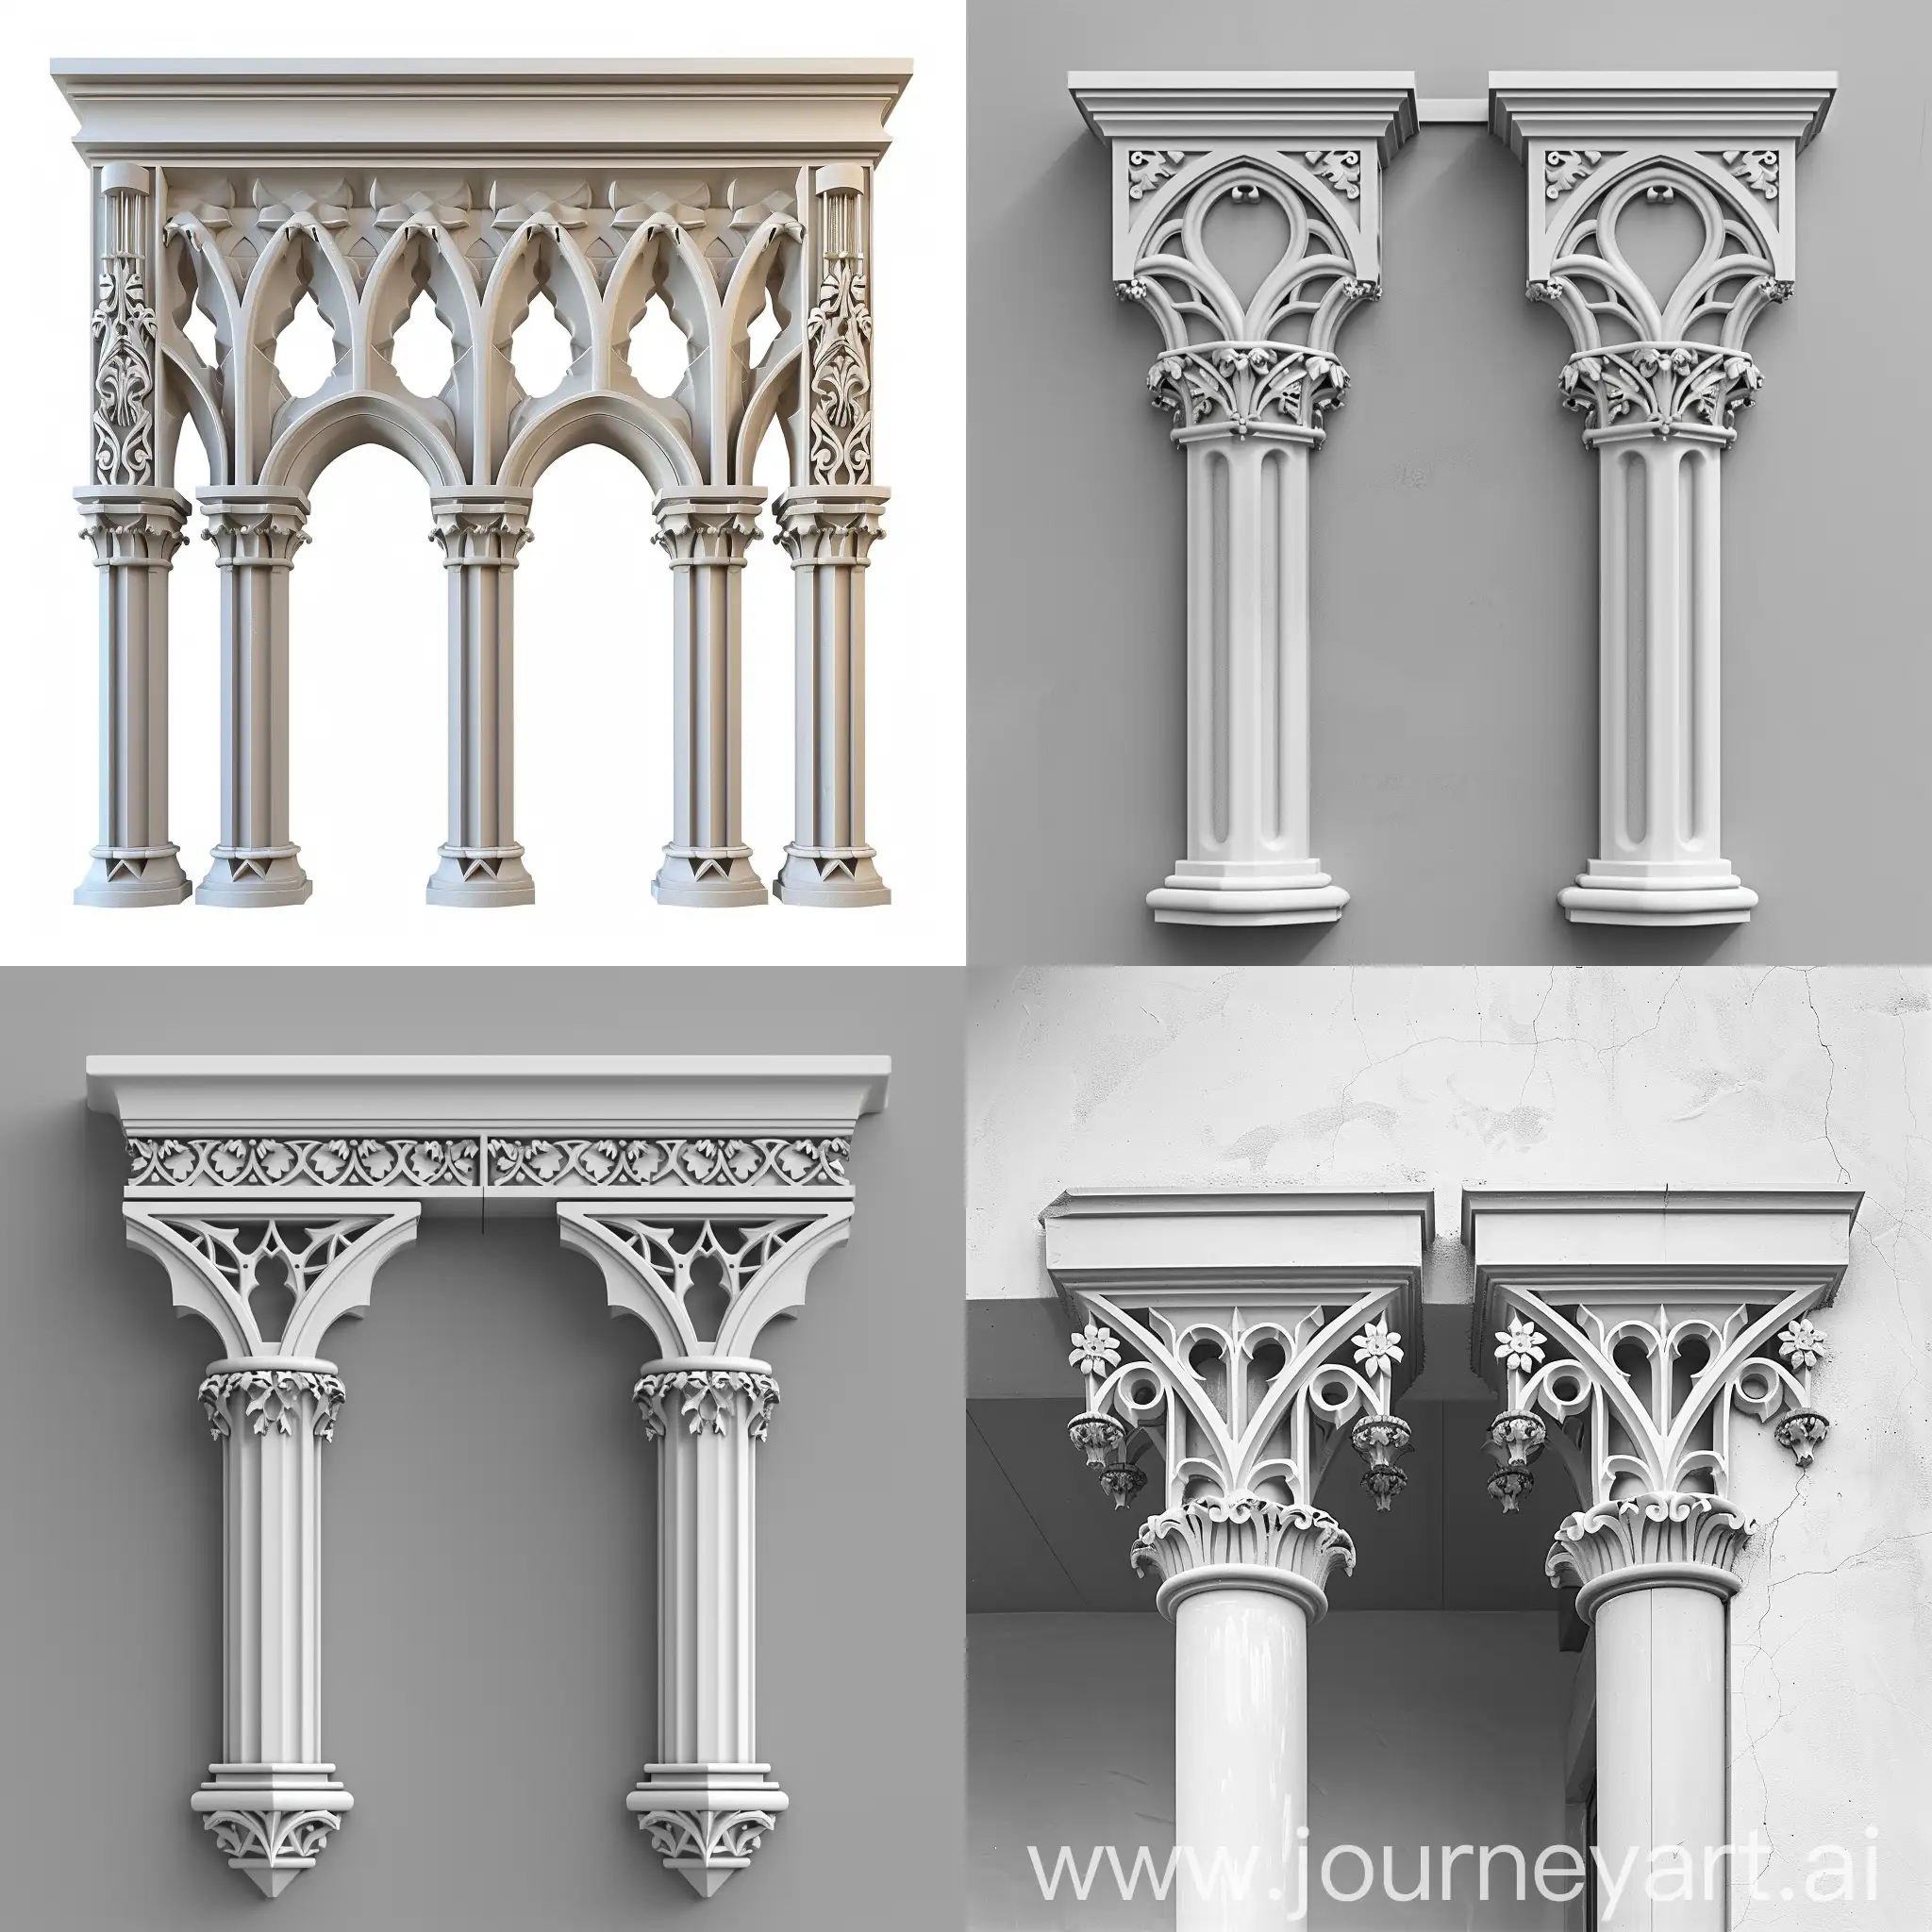 Gothic-and-Victorian-Style-Column-Trim-Design-with-Plaster-Decoration-and-Beam-Connection